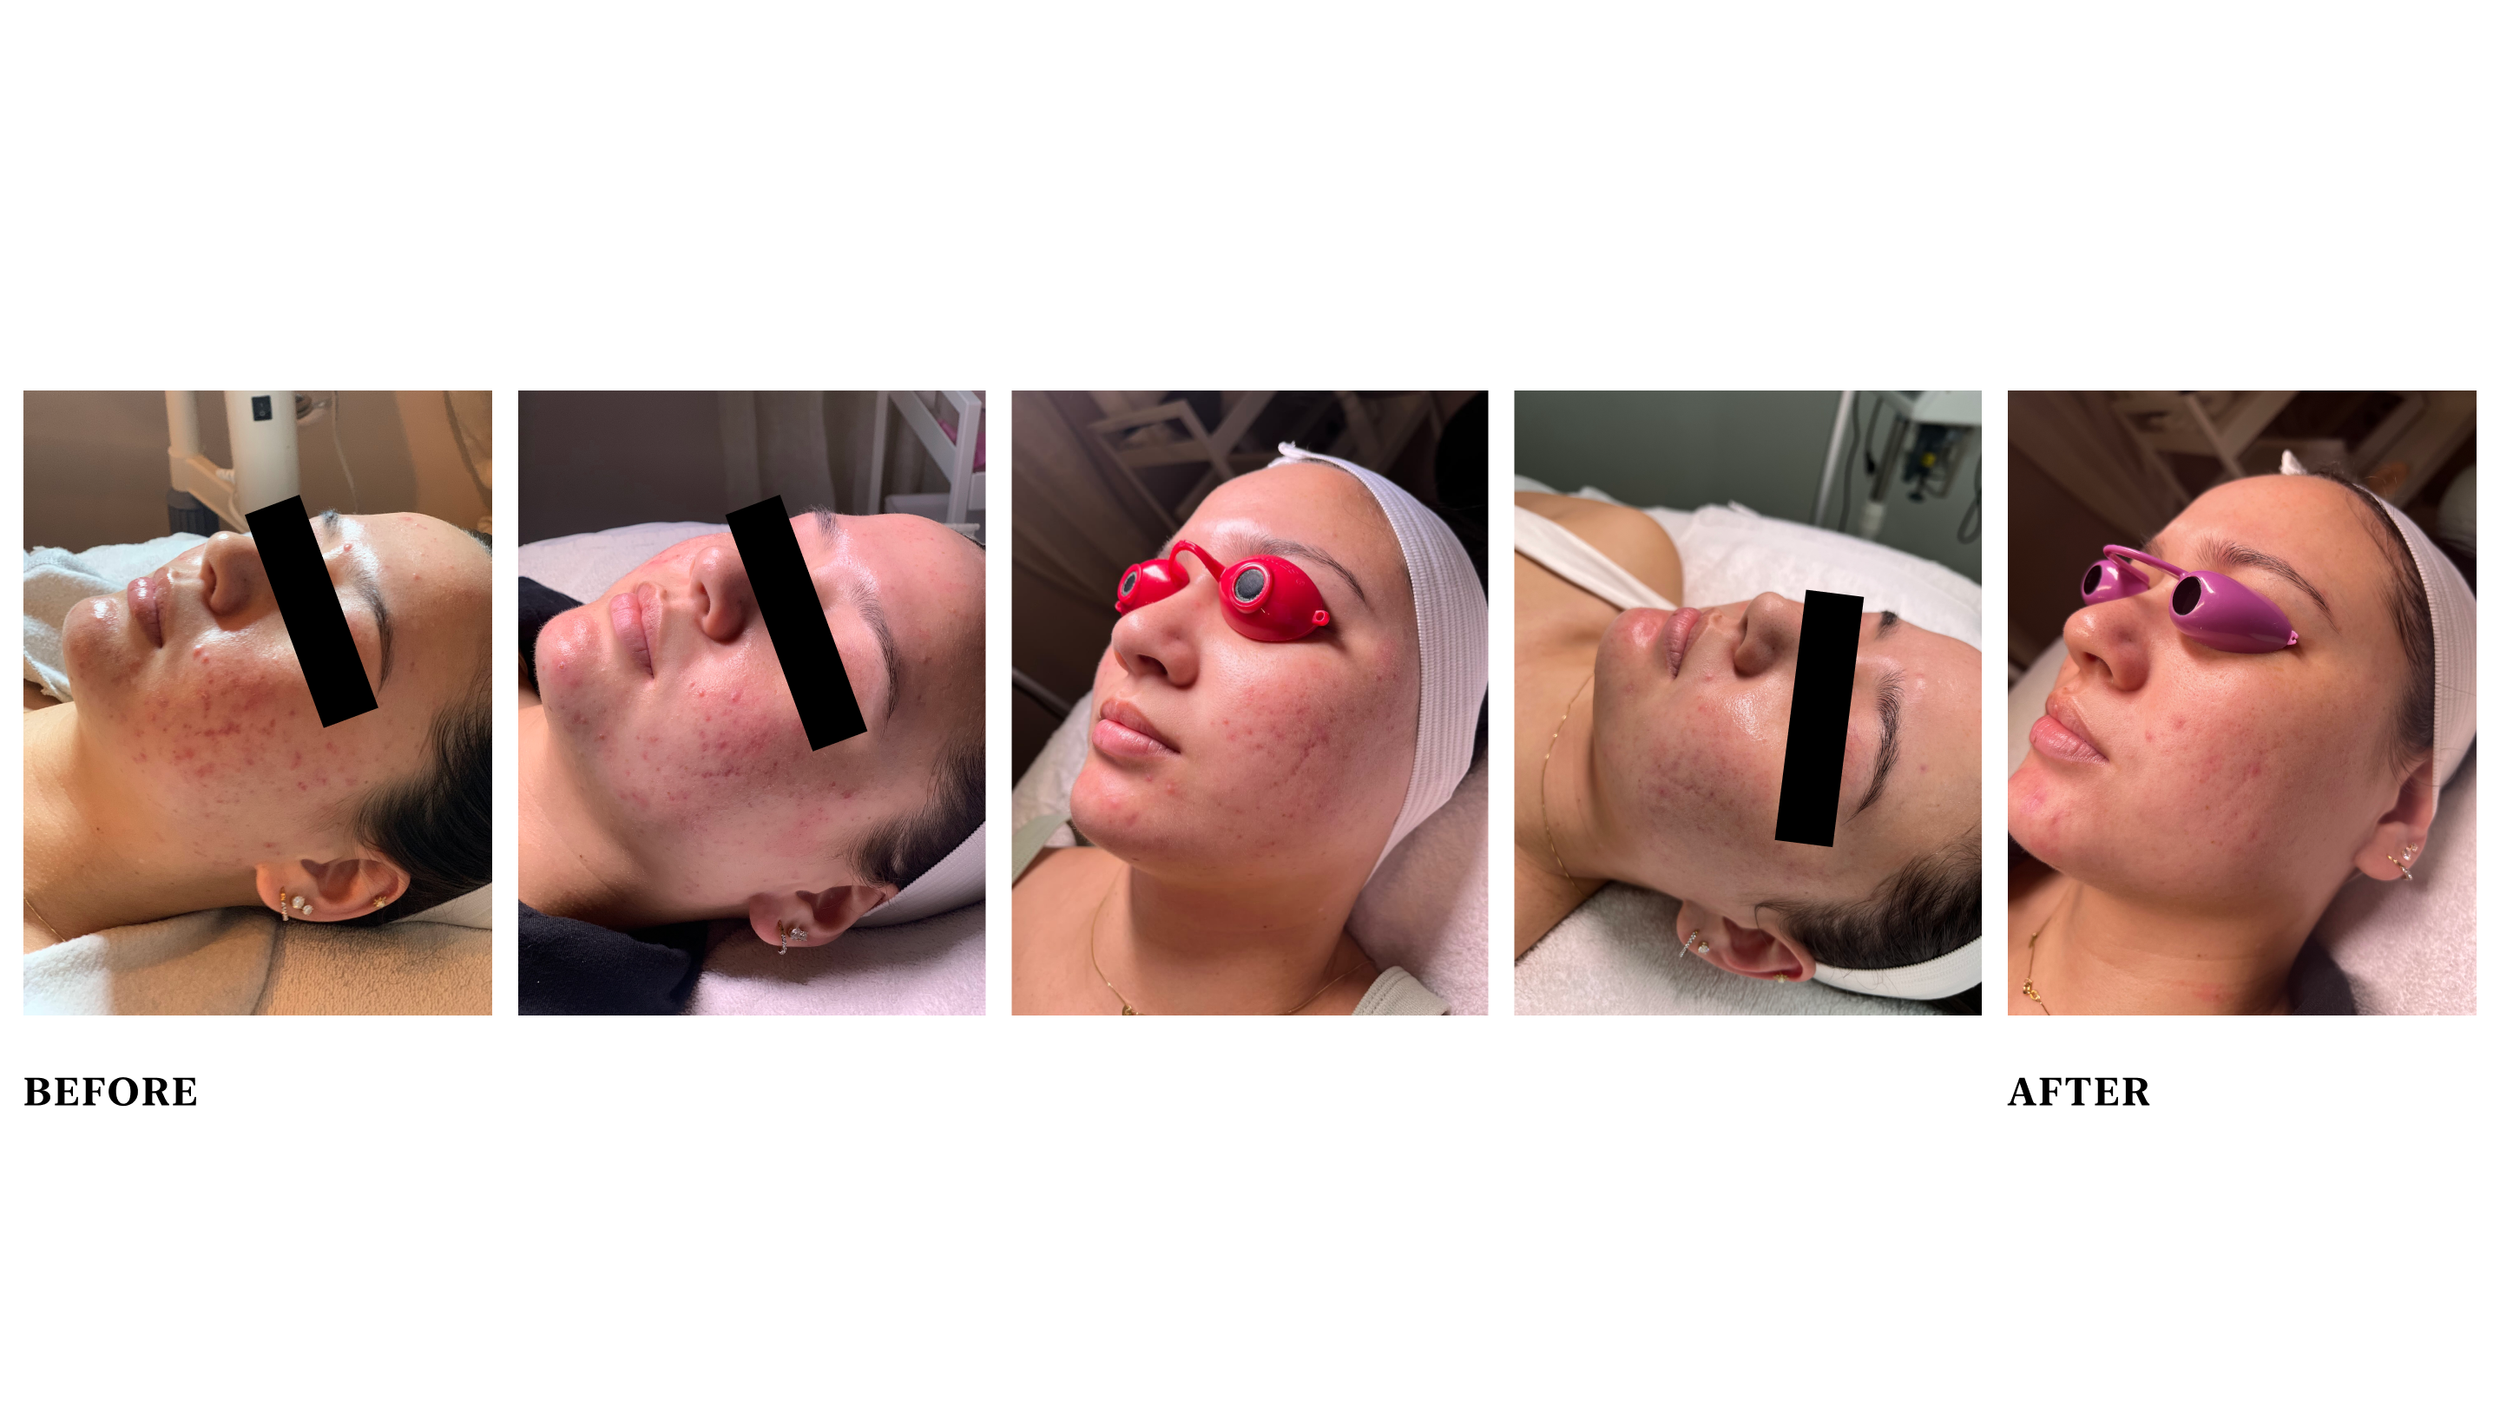  Condition: inflamed acne with post inflammatory pigmentation  Treatment: Celluma LED, and PCA peels. Consistent home care&nbsp;with customized PCA products and Living Libations best skin ever. 